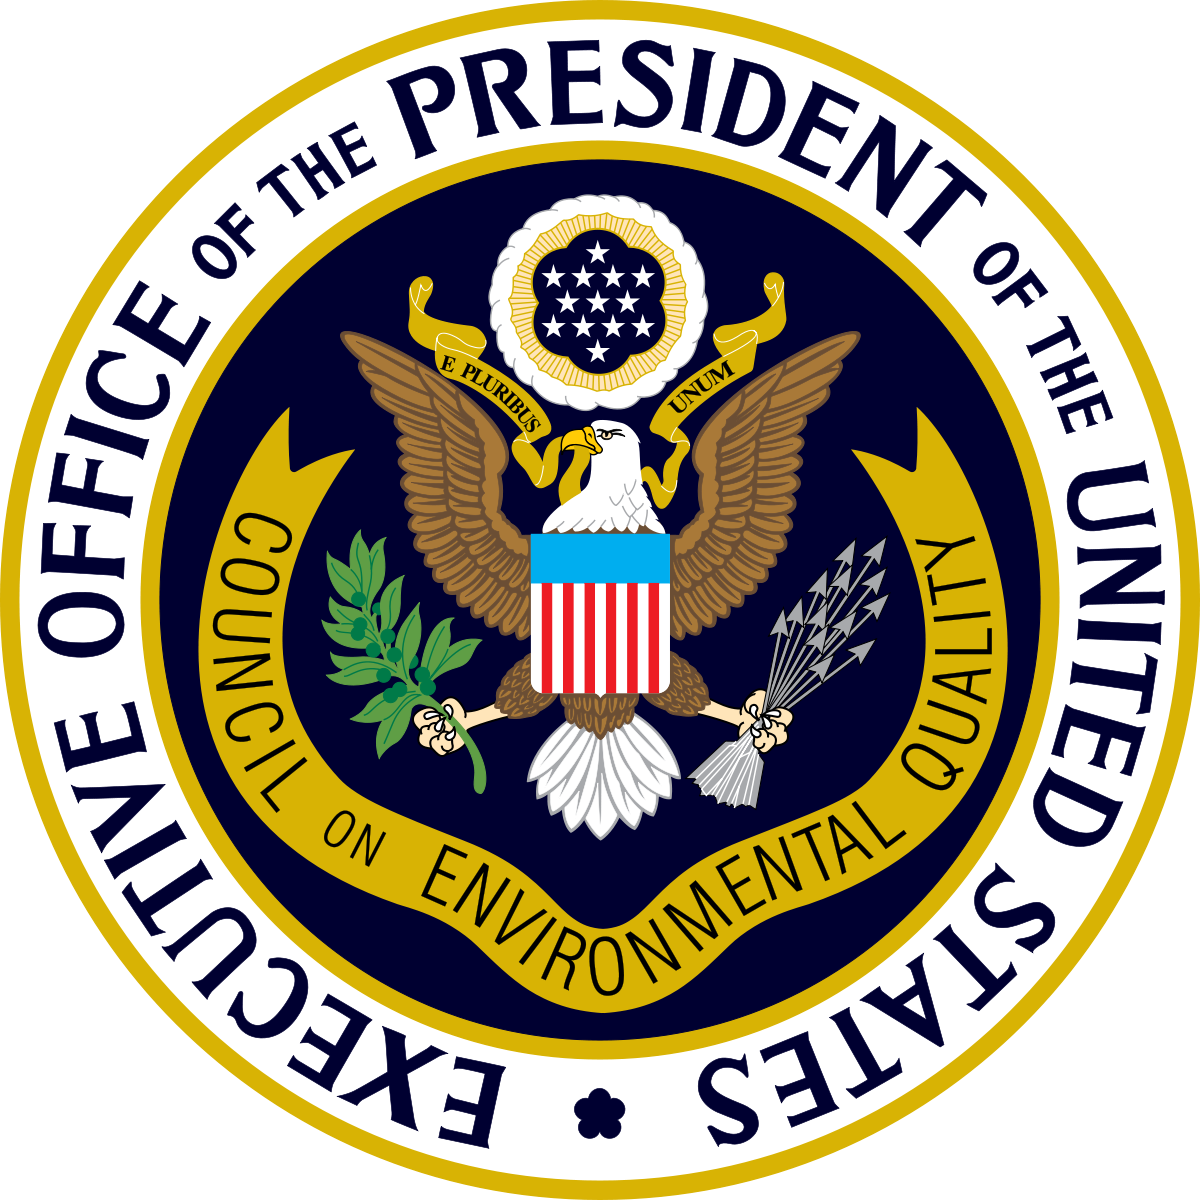 1200px-US-CouncilOnEnvironmentalQuality-Seal.svg.png